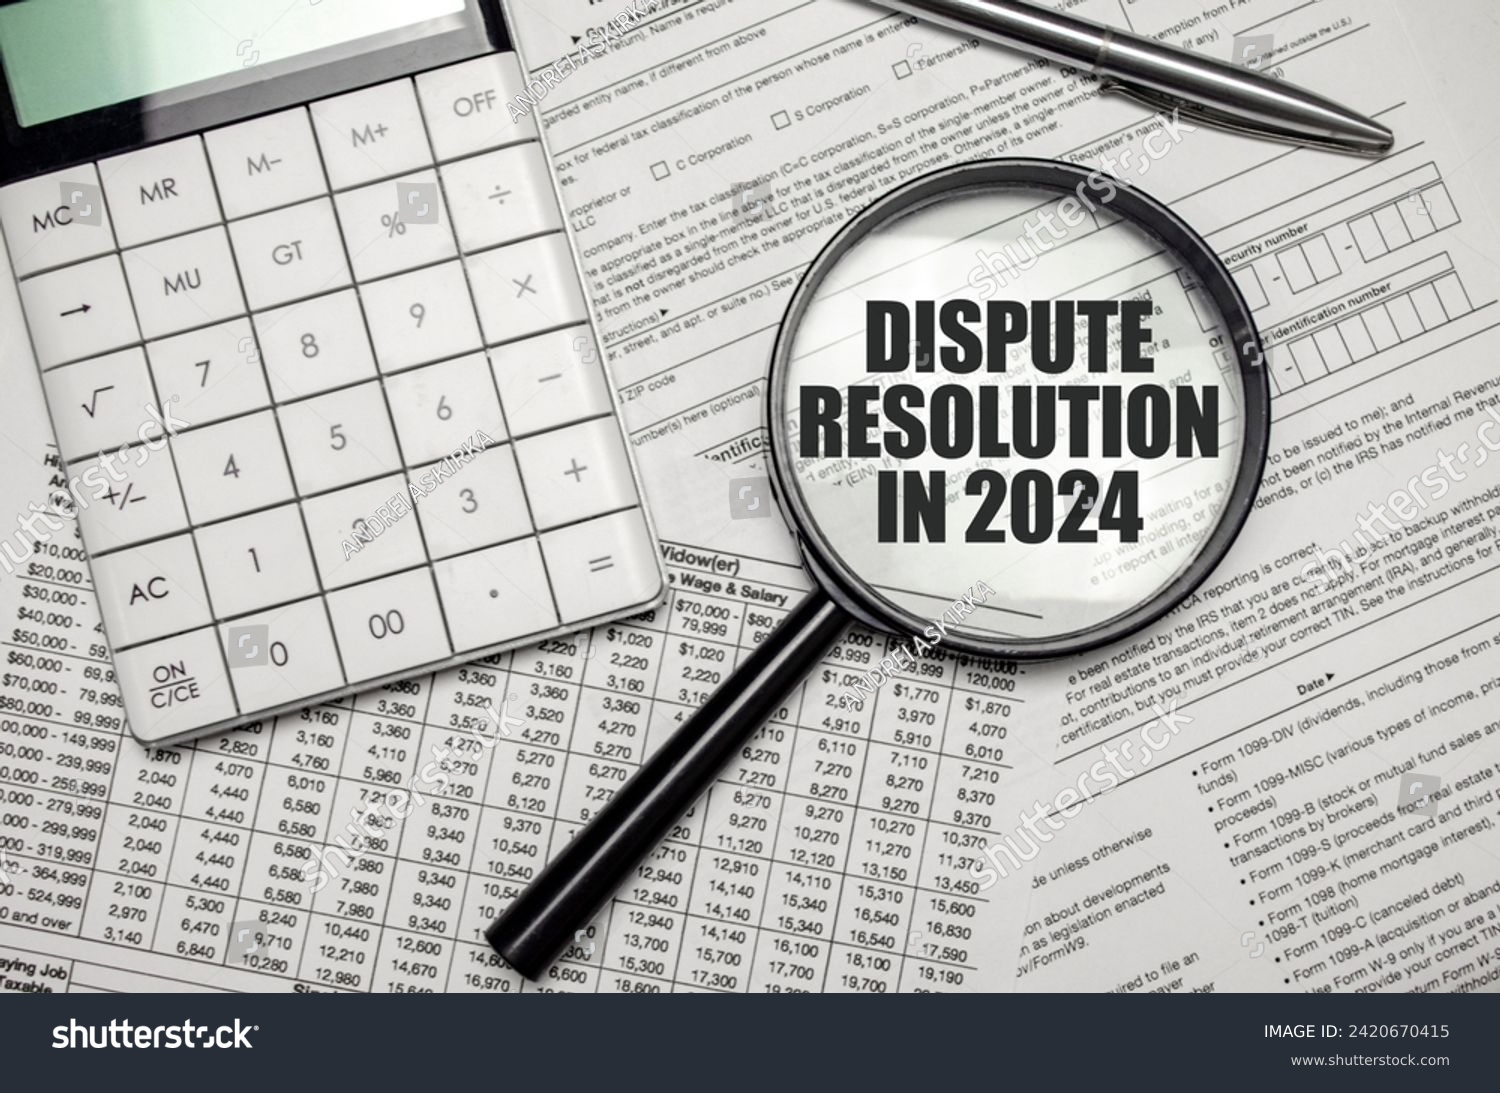 DISPUTE RESOLUTION IN 2024 word on magnifying glass with calculator and documents #2420670415